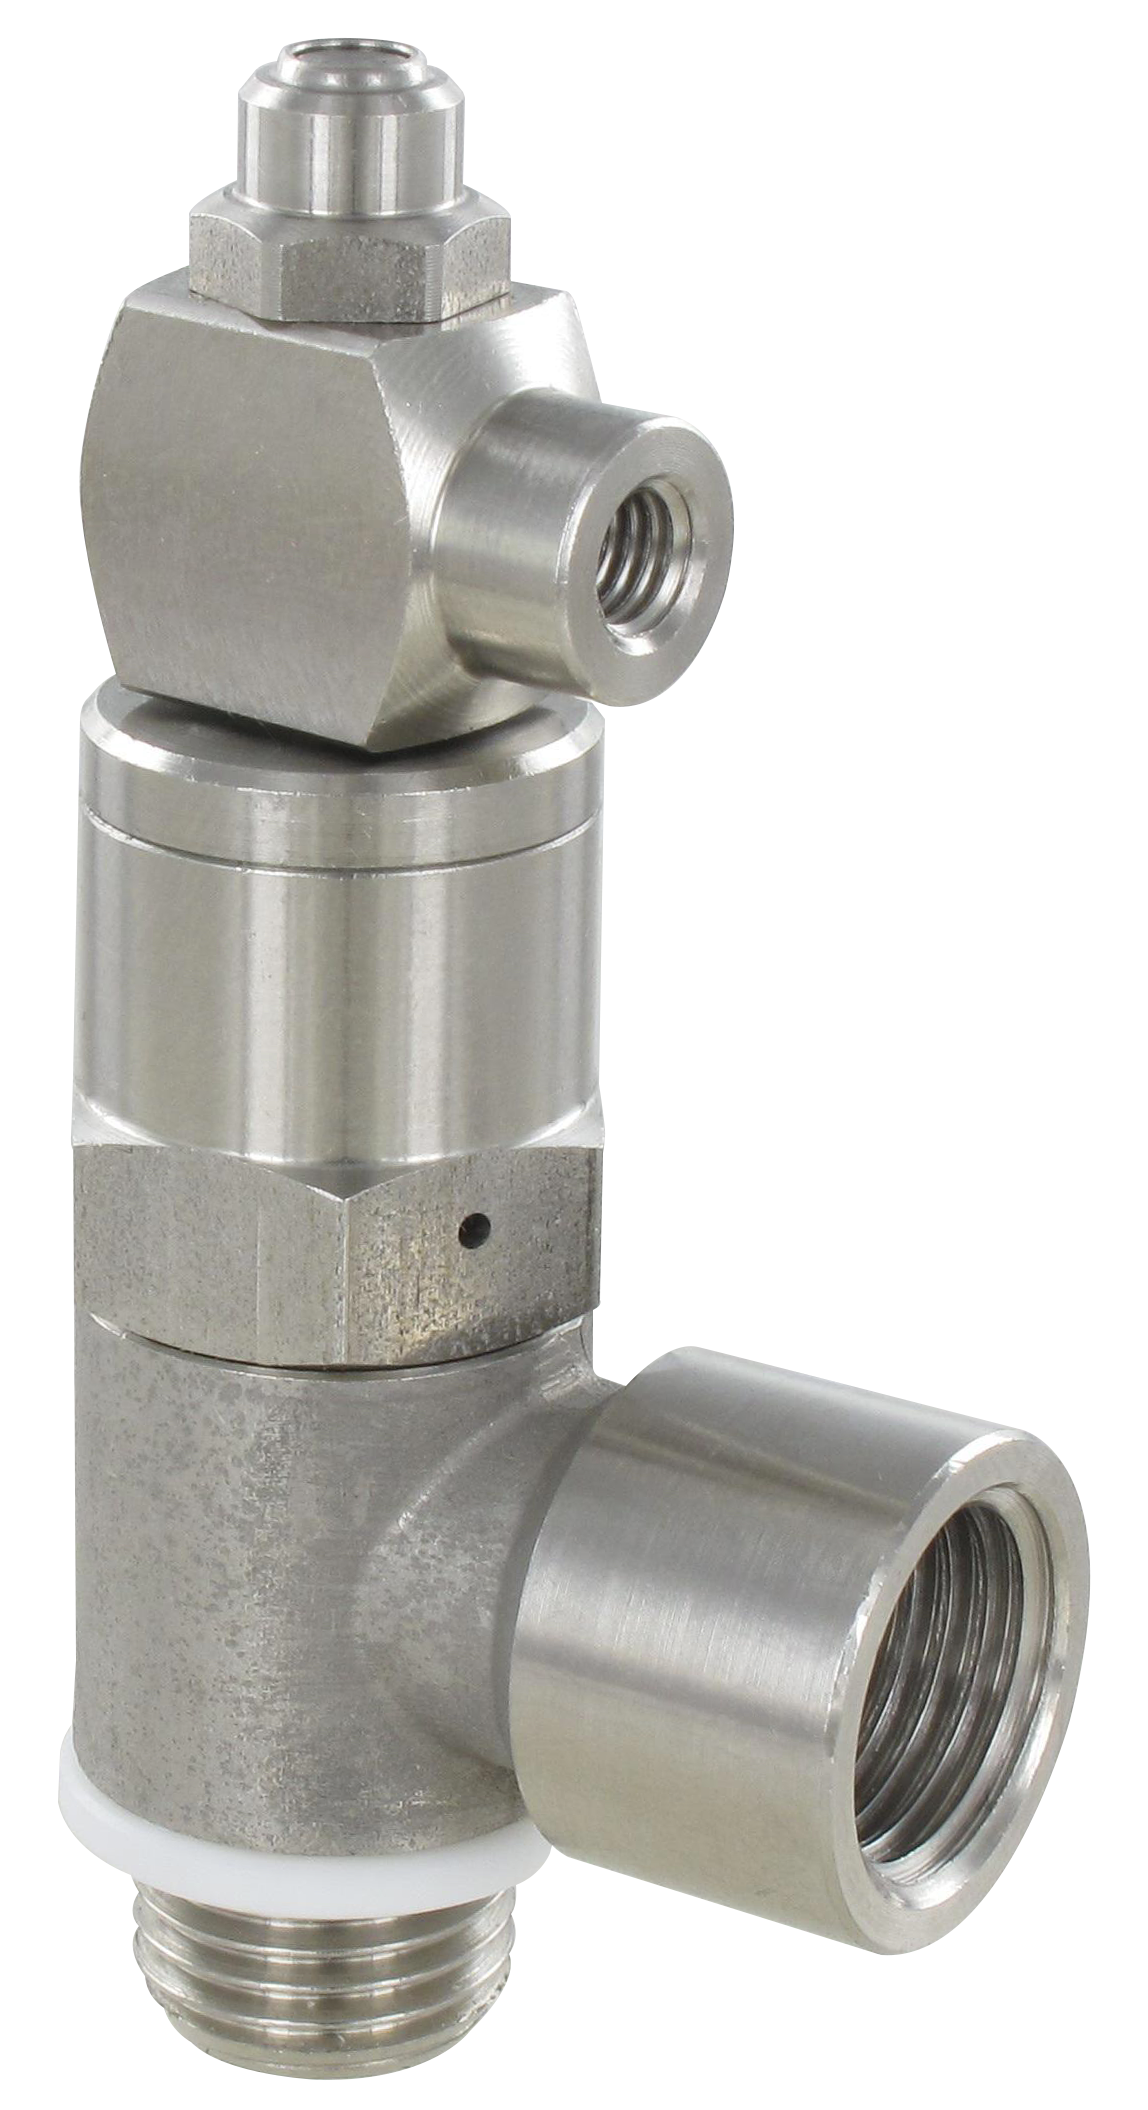 316L stainless steel pilot operated check valves for pneumatic cylinders